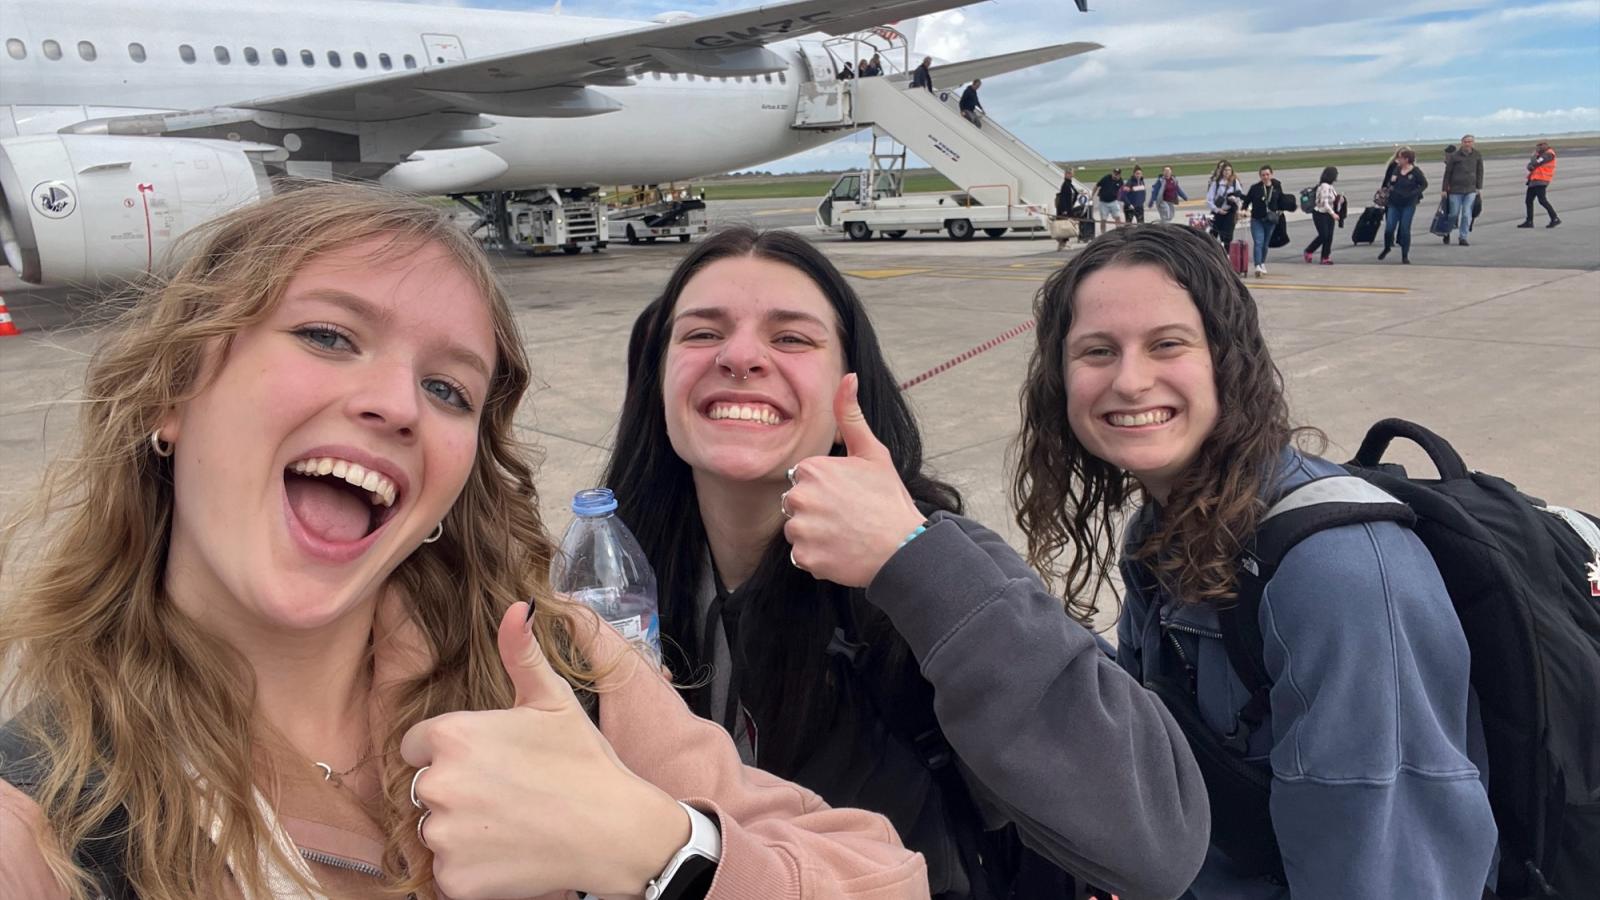 Students landing in France